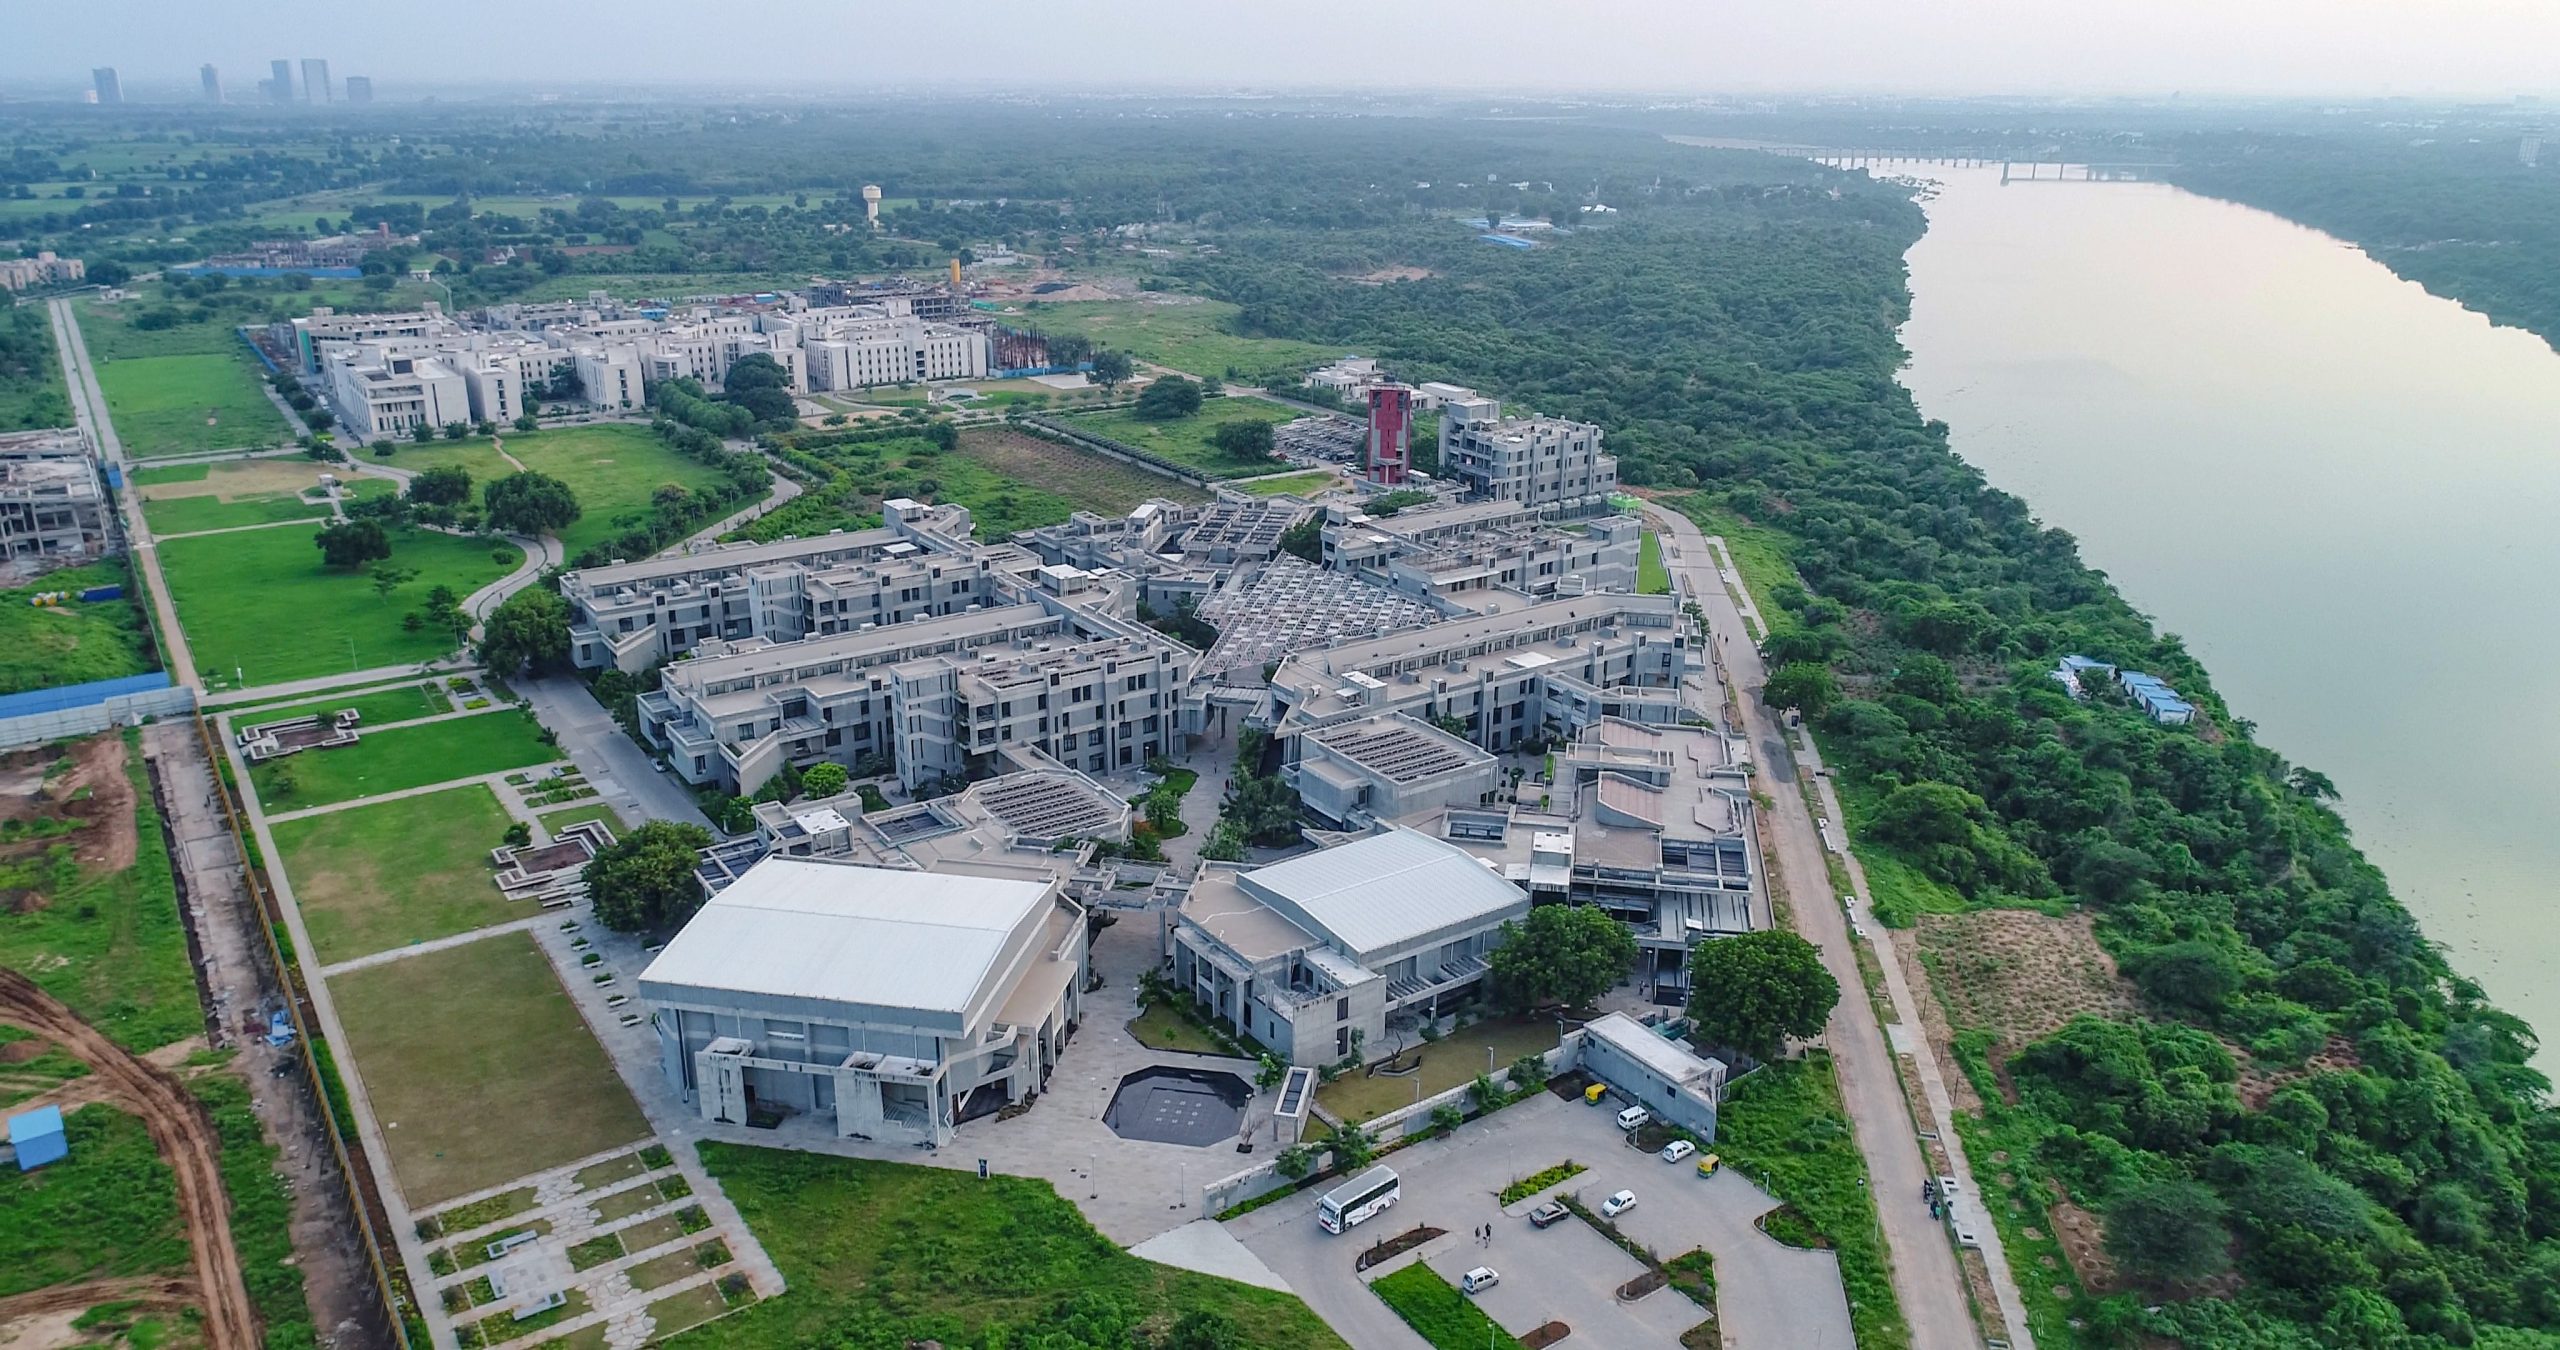 IIT Gandhinagar - IIT Gandhinagar is happy to announce that admissions to  its Masters in Society and Culture 2020 is open now! The admission test and  interview dates to be locked in